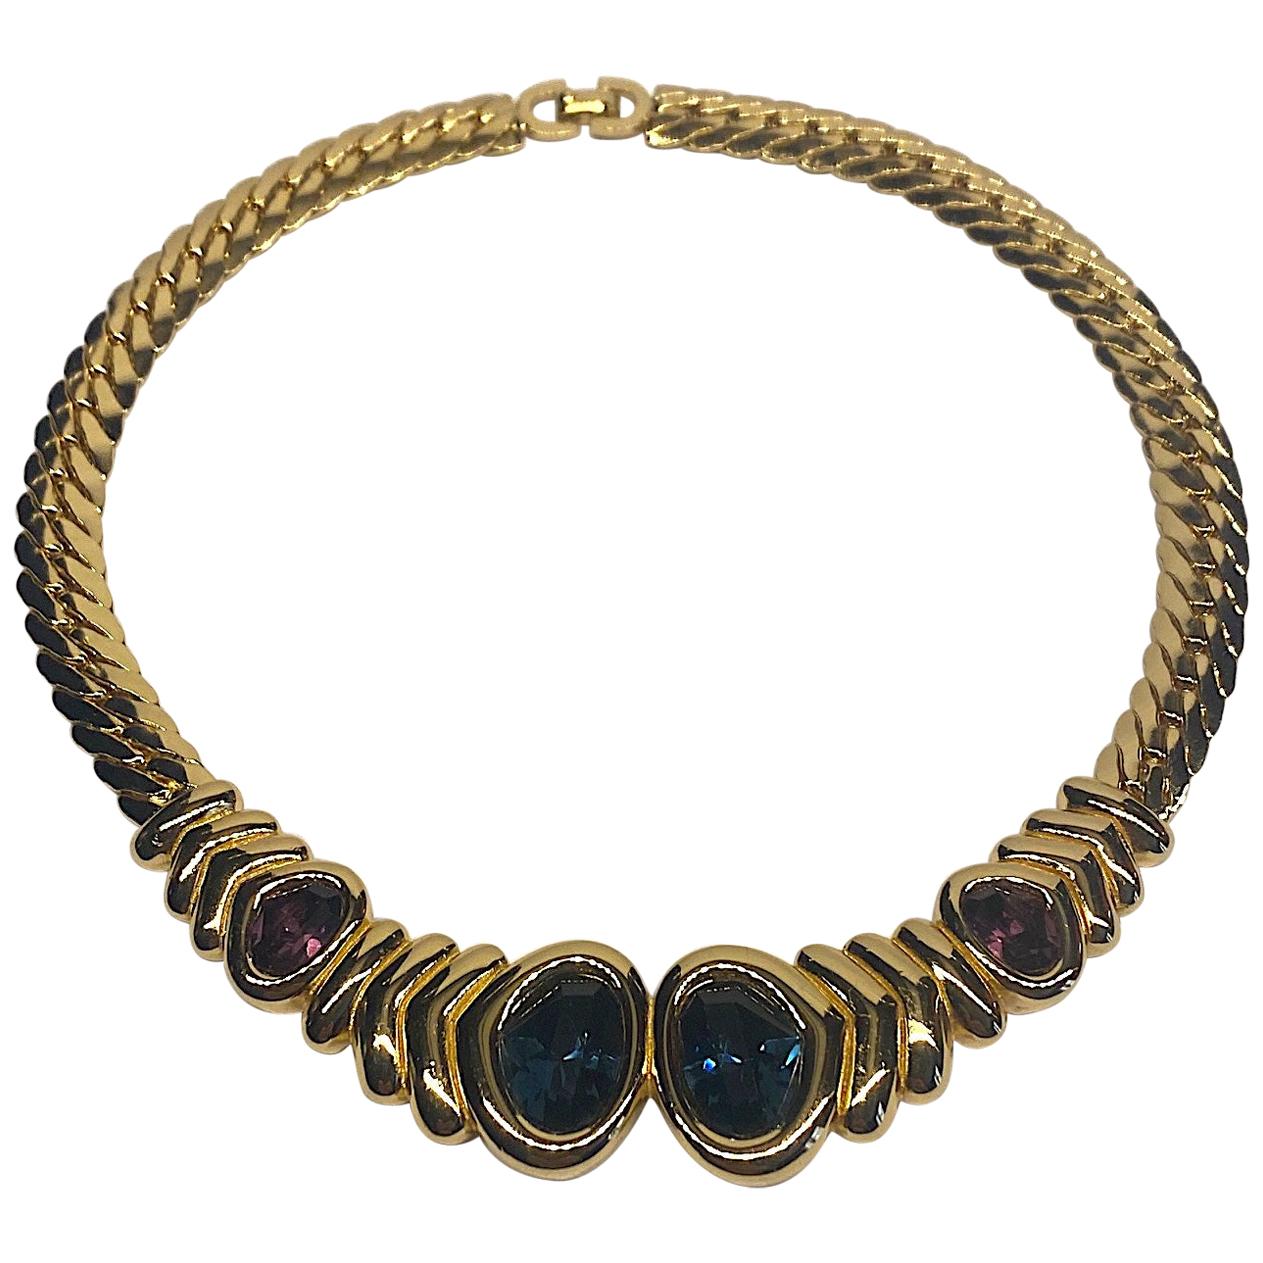 Christian Dior 1980s Necklace with Purple & Blue Crystal Stones